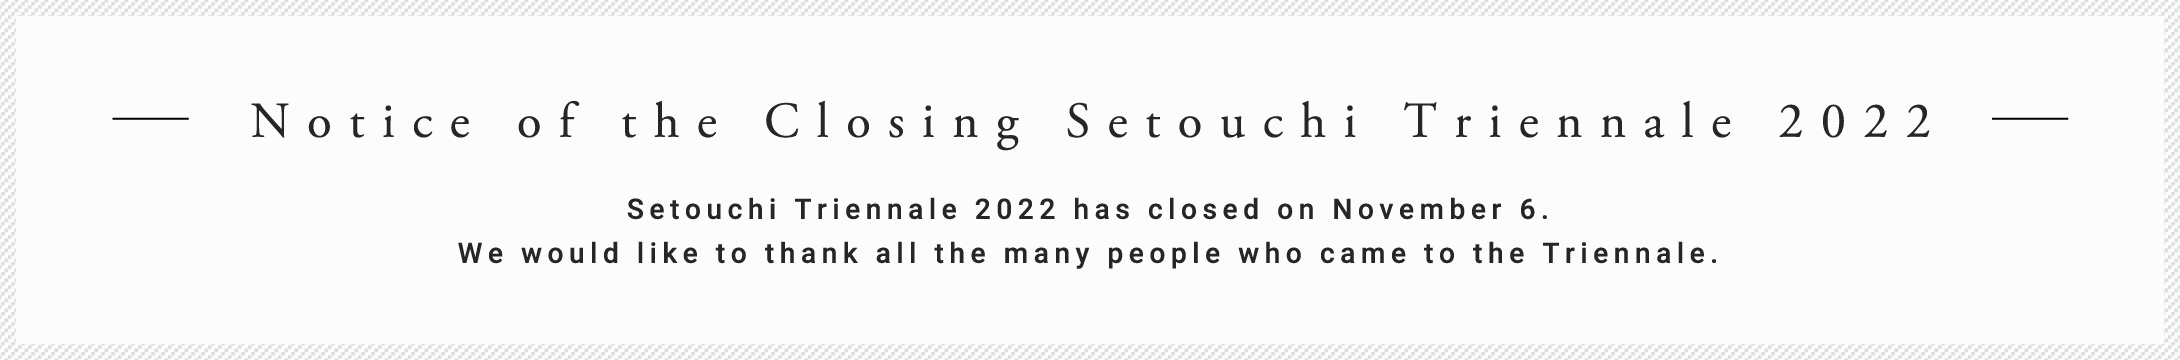 Notice of the Closing Setouchi Triennale 2022 Setouchi Triennale 2022 has closed on November 6. We would like to thank all the many people who came to the Triennale.